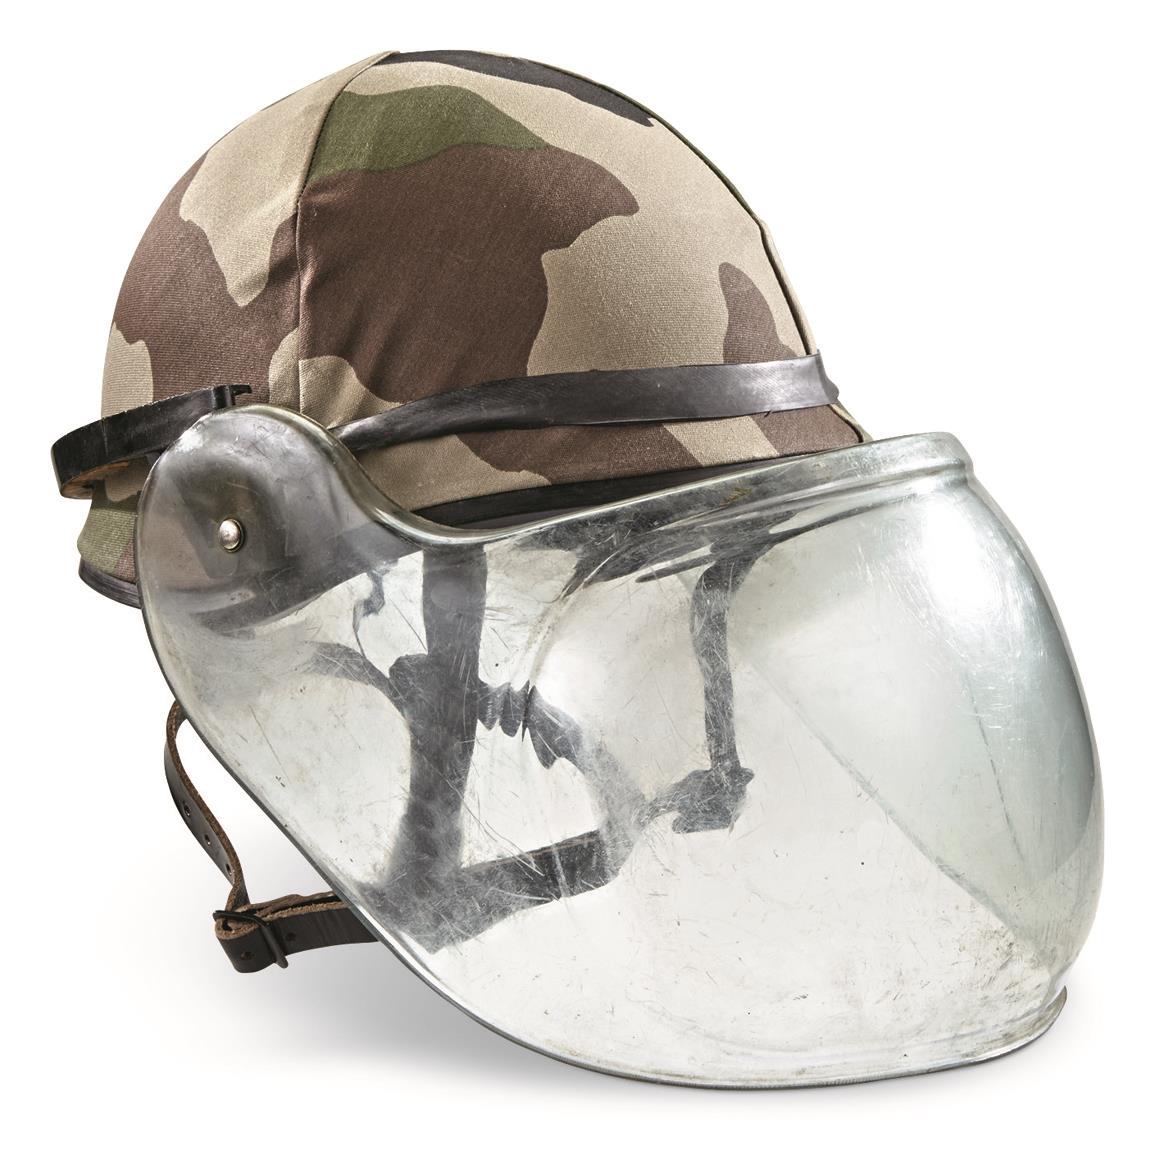 Clear plastic face shield